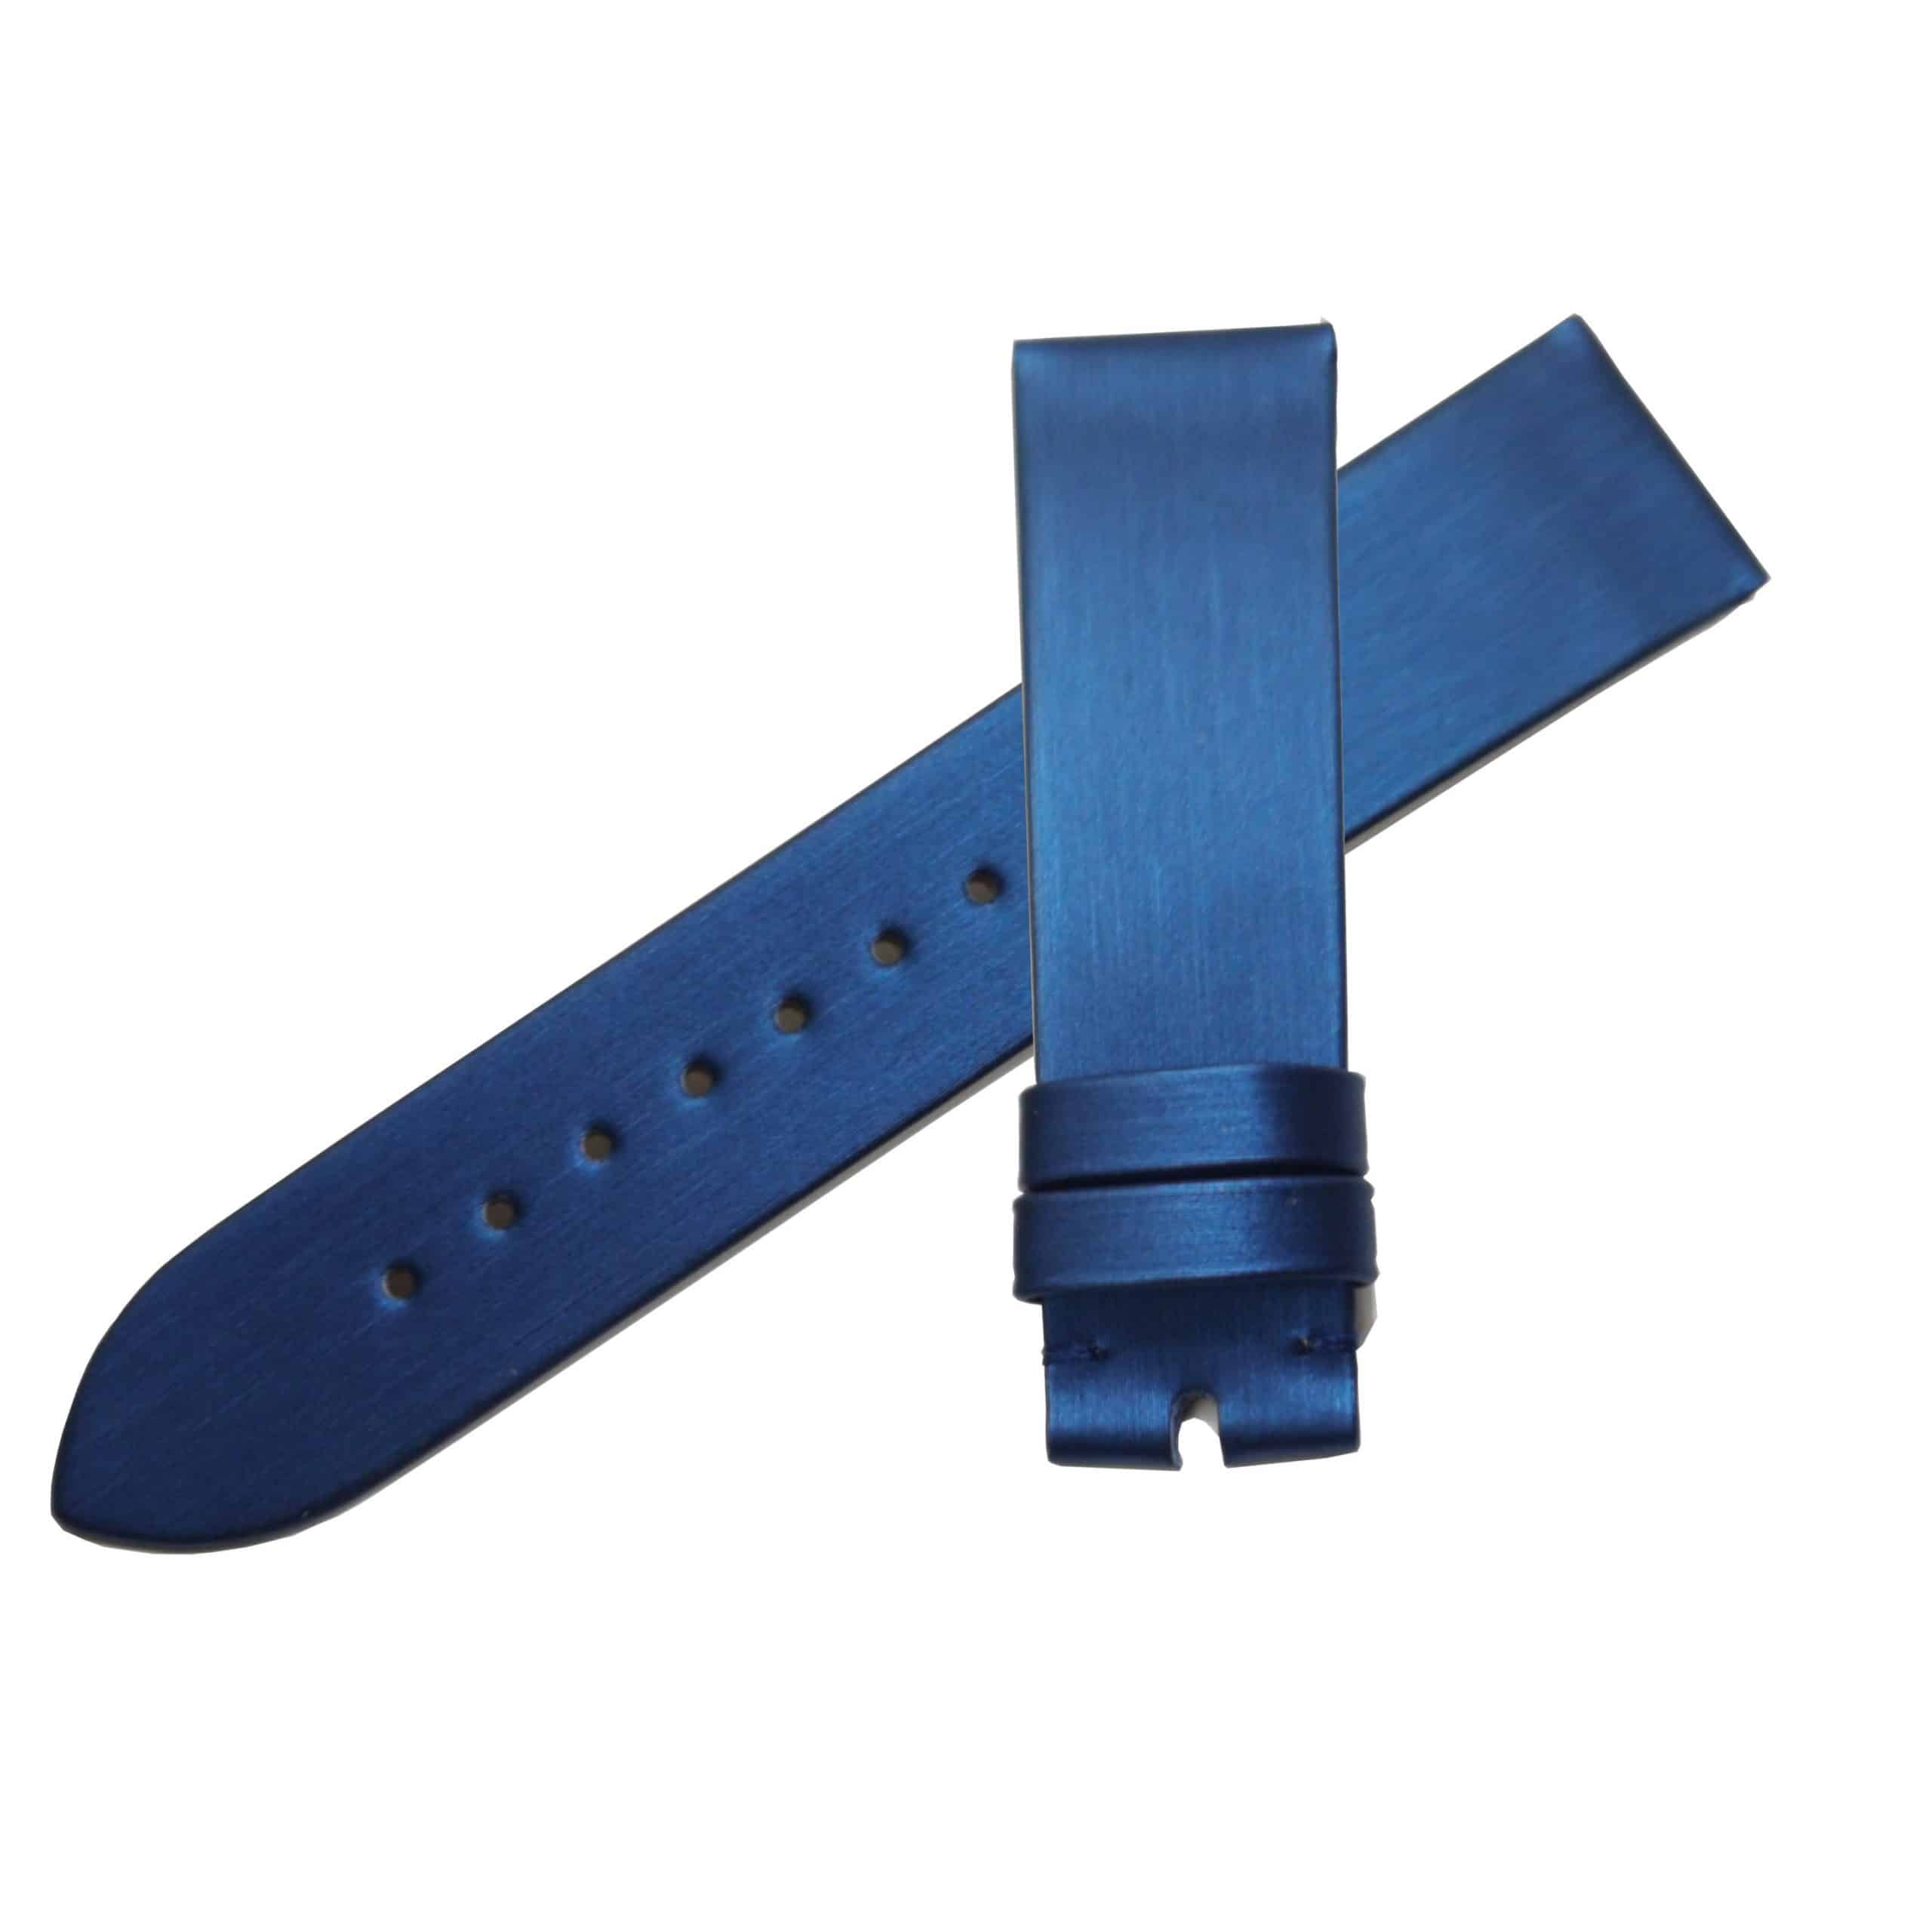 Premium Omega watch straps replacement Omega Deville watch strap blue satin leather watchbands online for sale